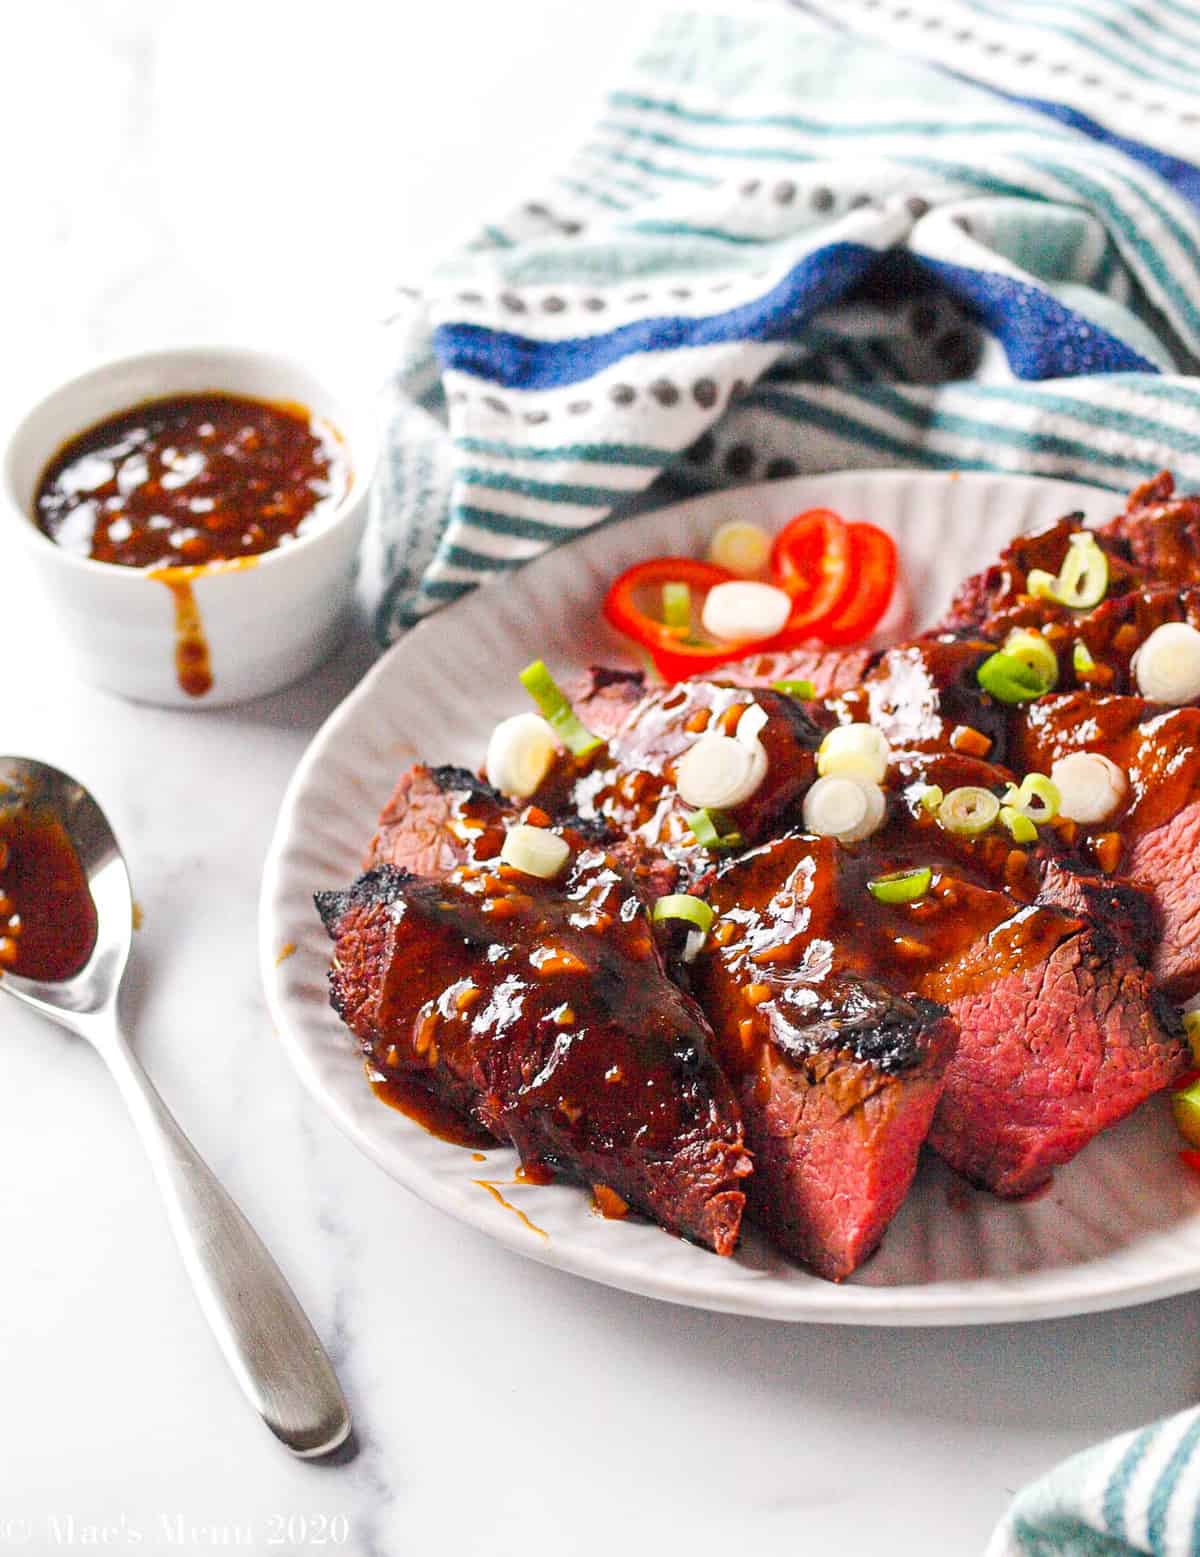 a plate of sliced trip tip with sweet soy sauce glaze. Beside the plate sits a spoonful of glaze and a cup of glaze.